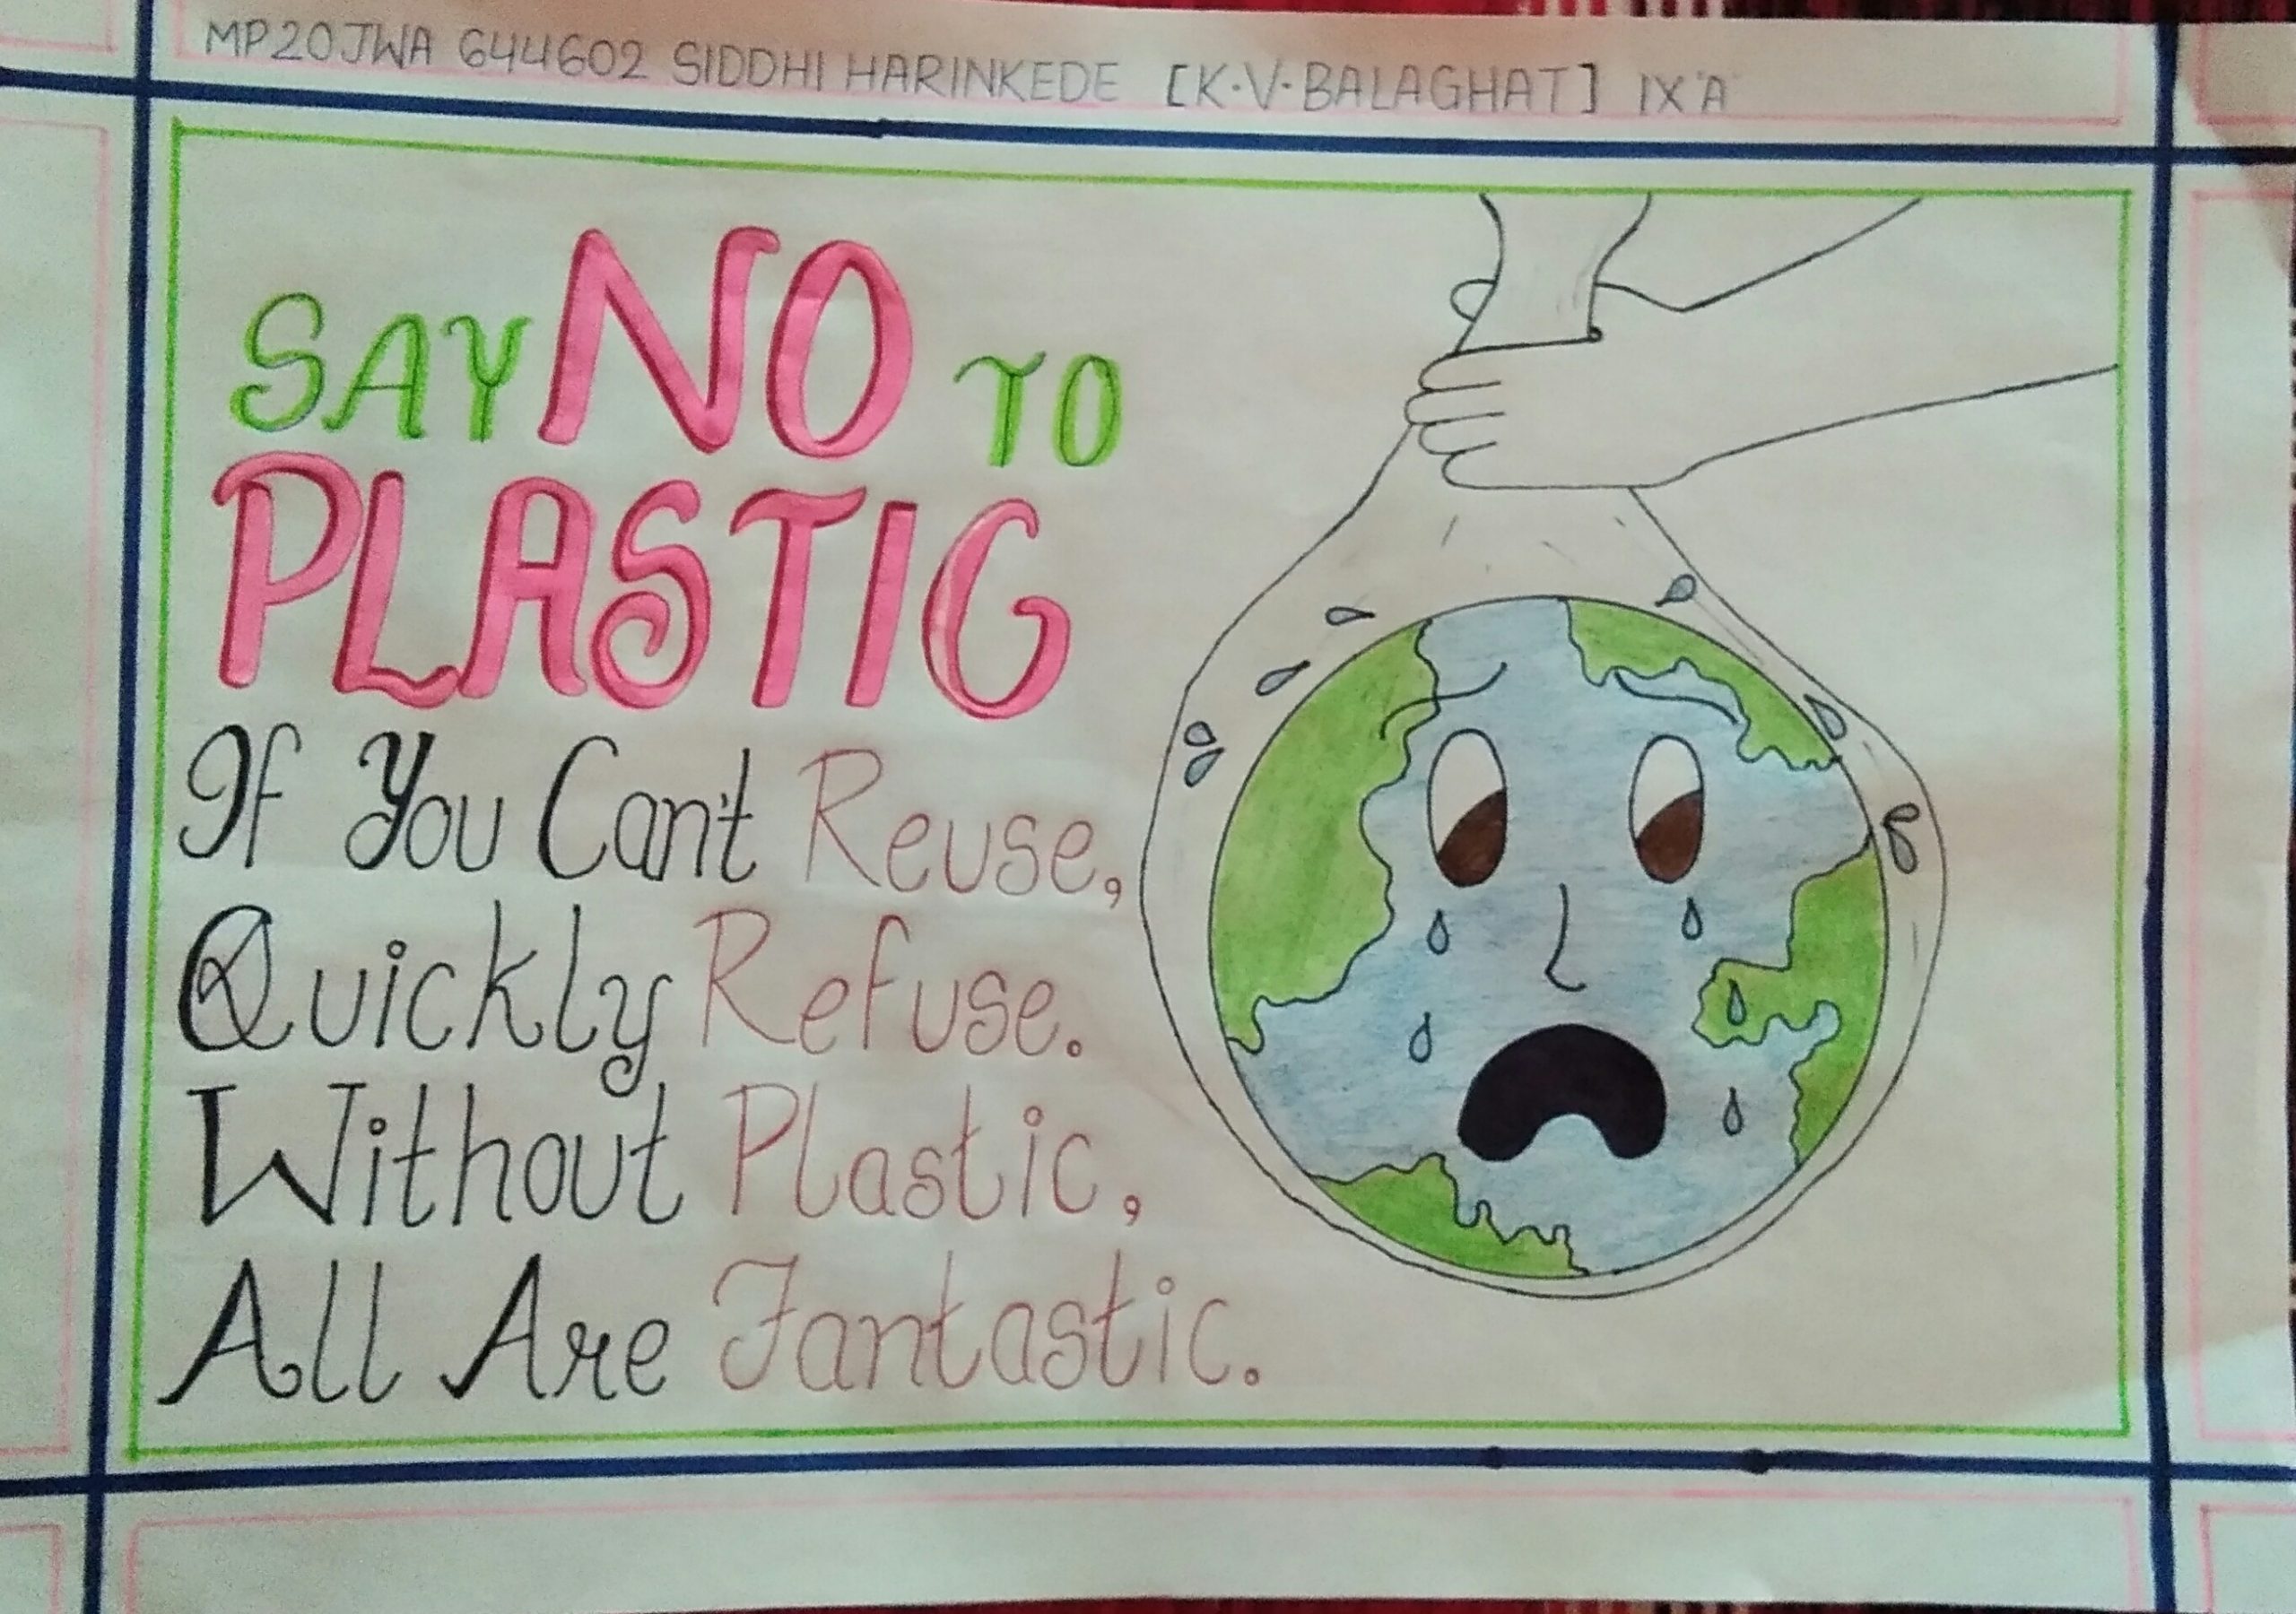 Quick Guide to NYC's Plastic Bag Ban Starting March 1 | Plastic bag design,  Bags, Cartoon styles